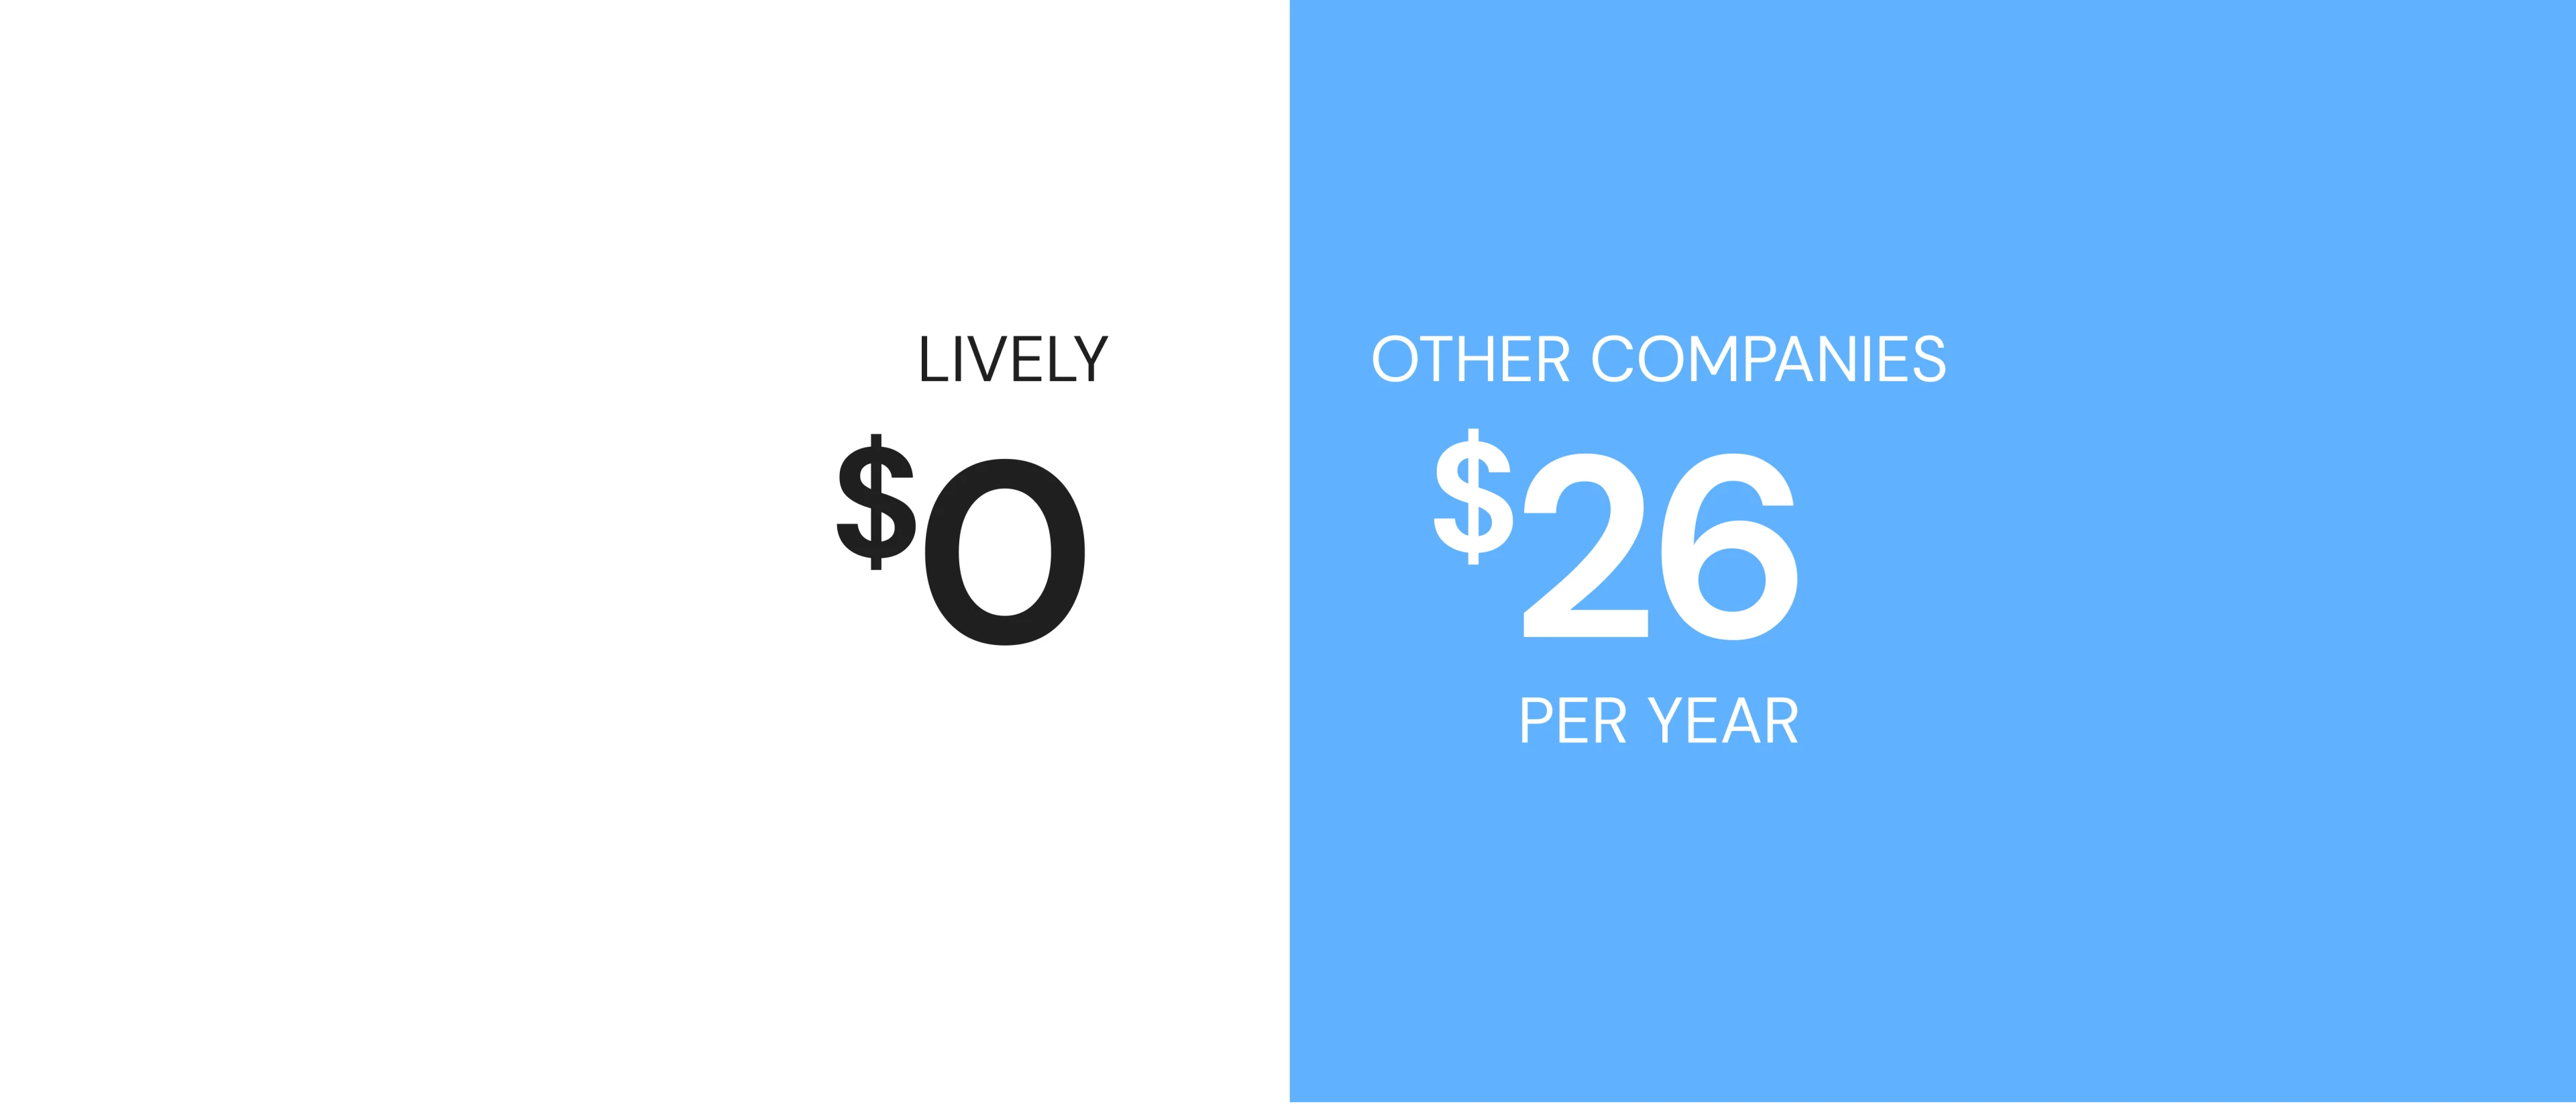 table comparing yearly hsa costs for lively vs. other companies